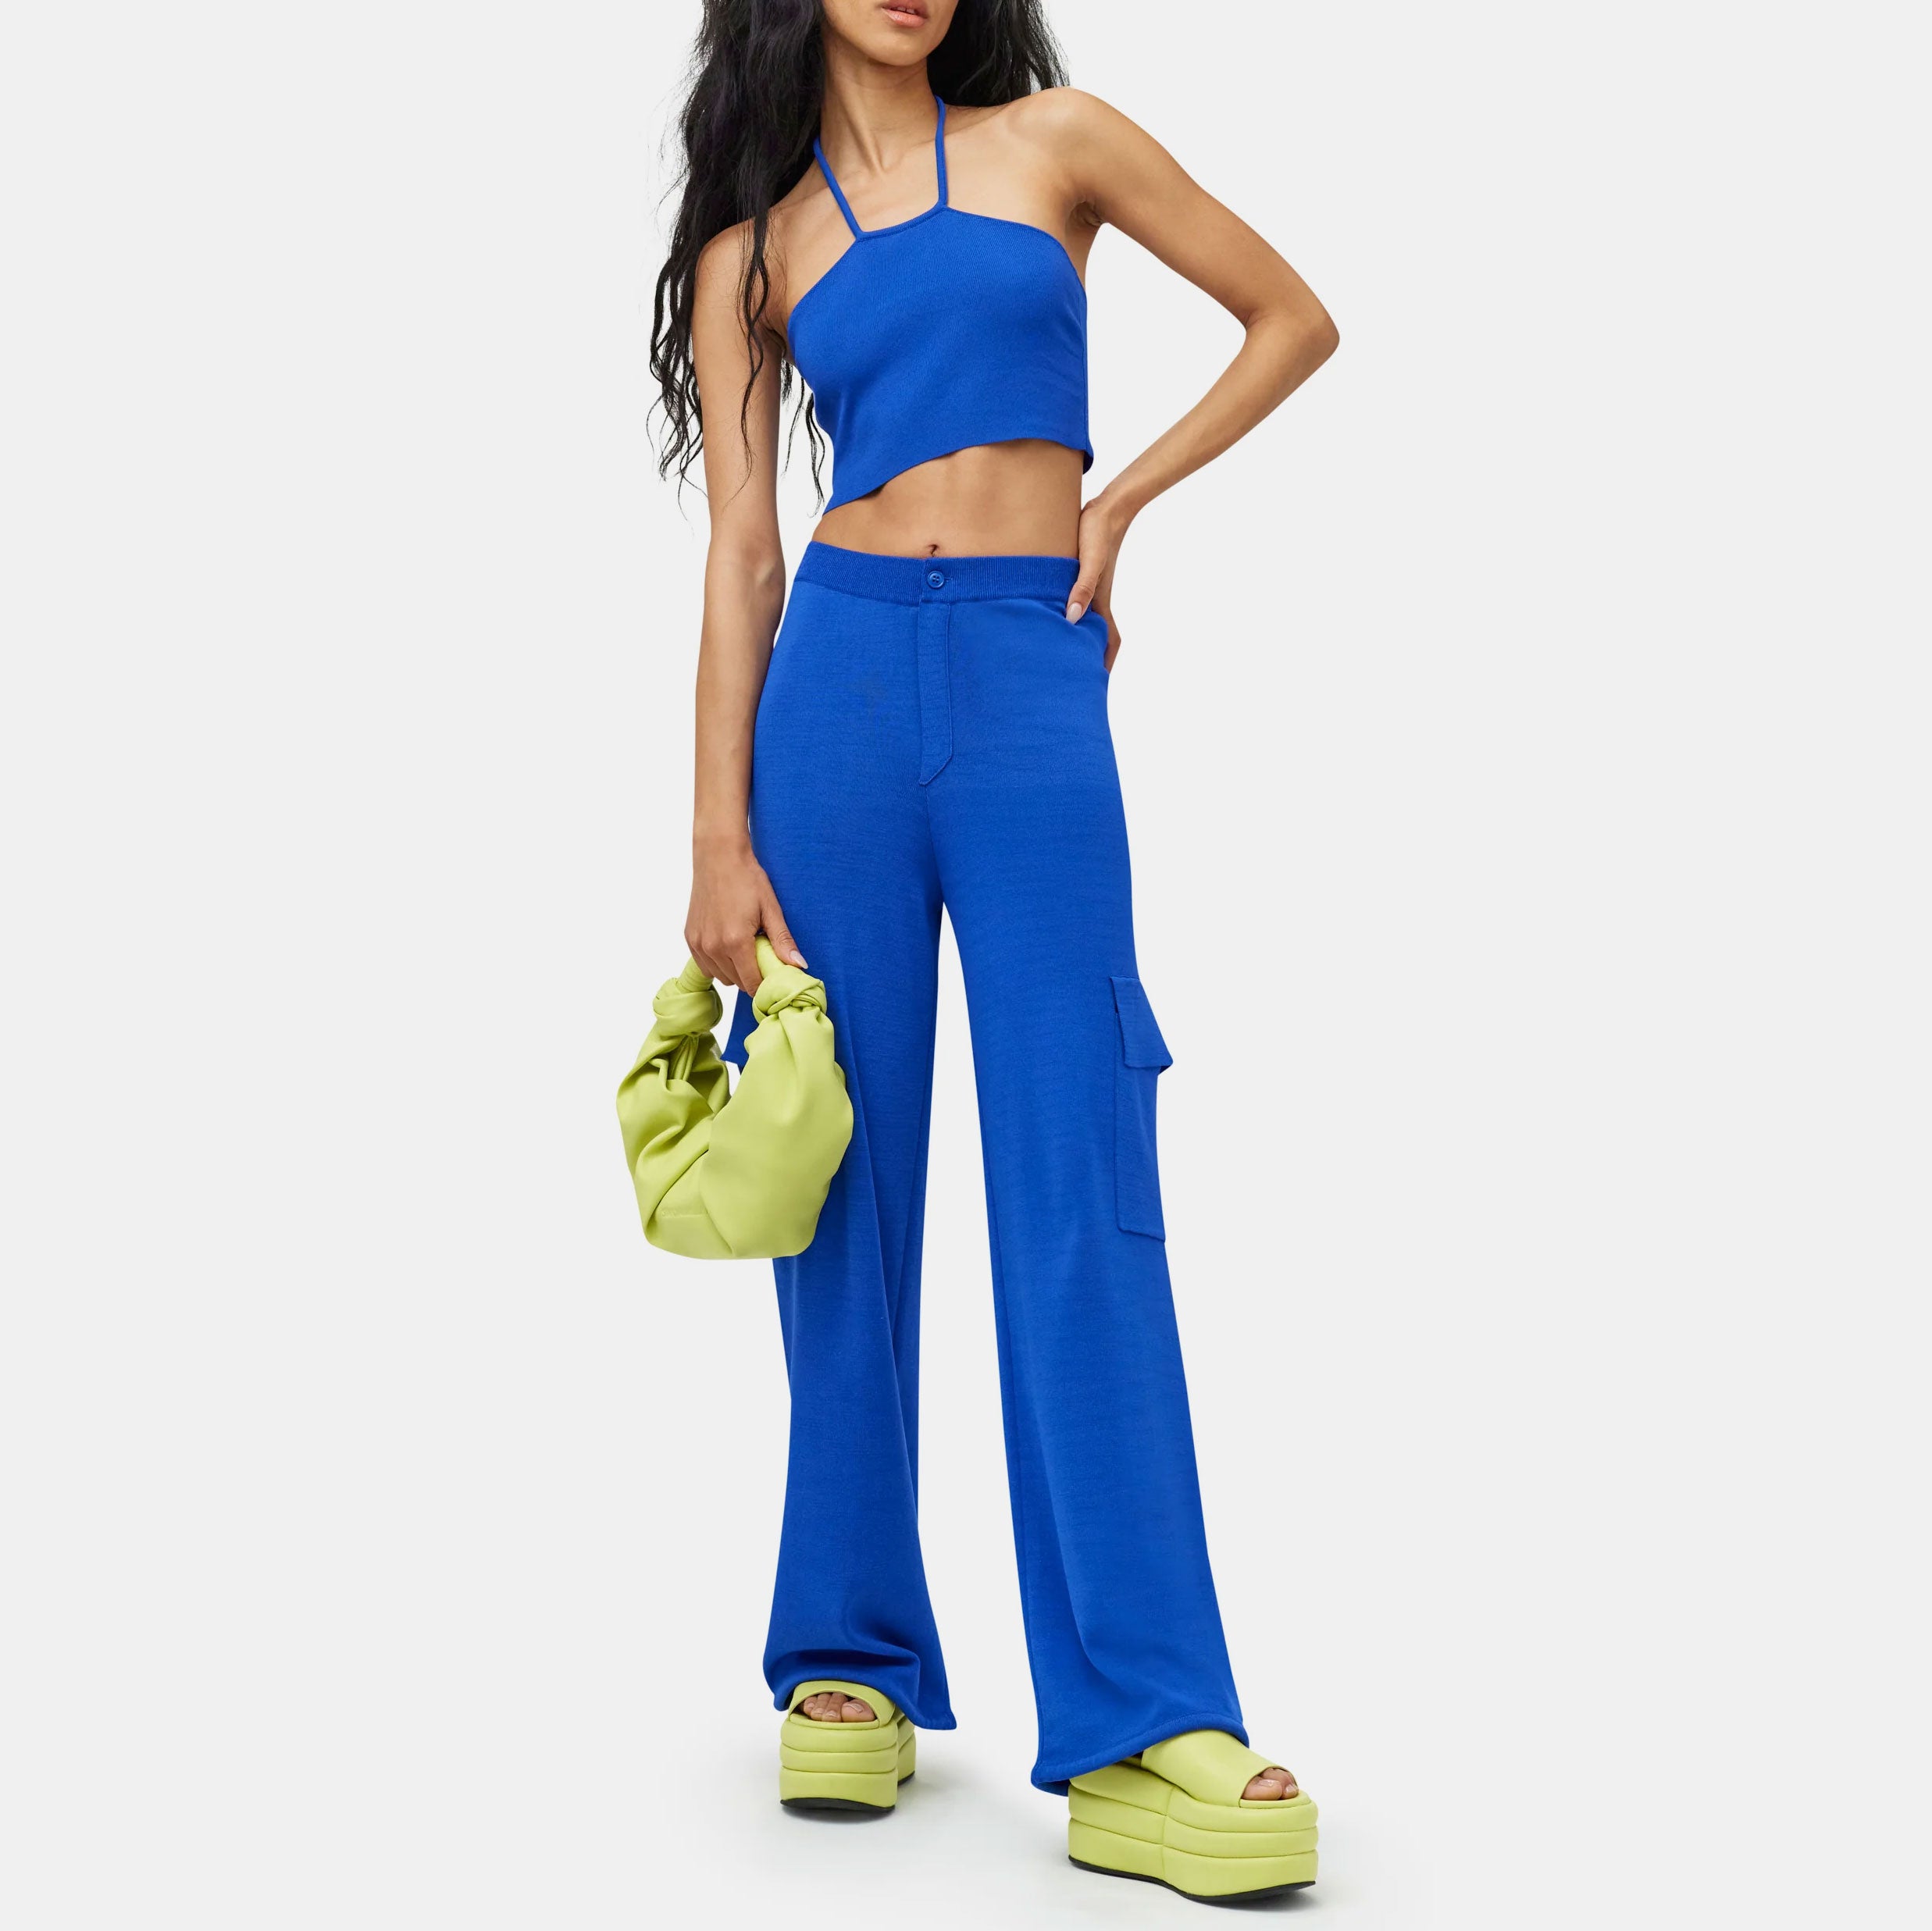 Close detail half body photo of the model wearing the Hesby Pant - a vibrant blue knit wide leg pant with side cargo-style pockets and a button & zip closure - full outfit view.